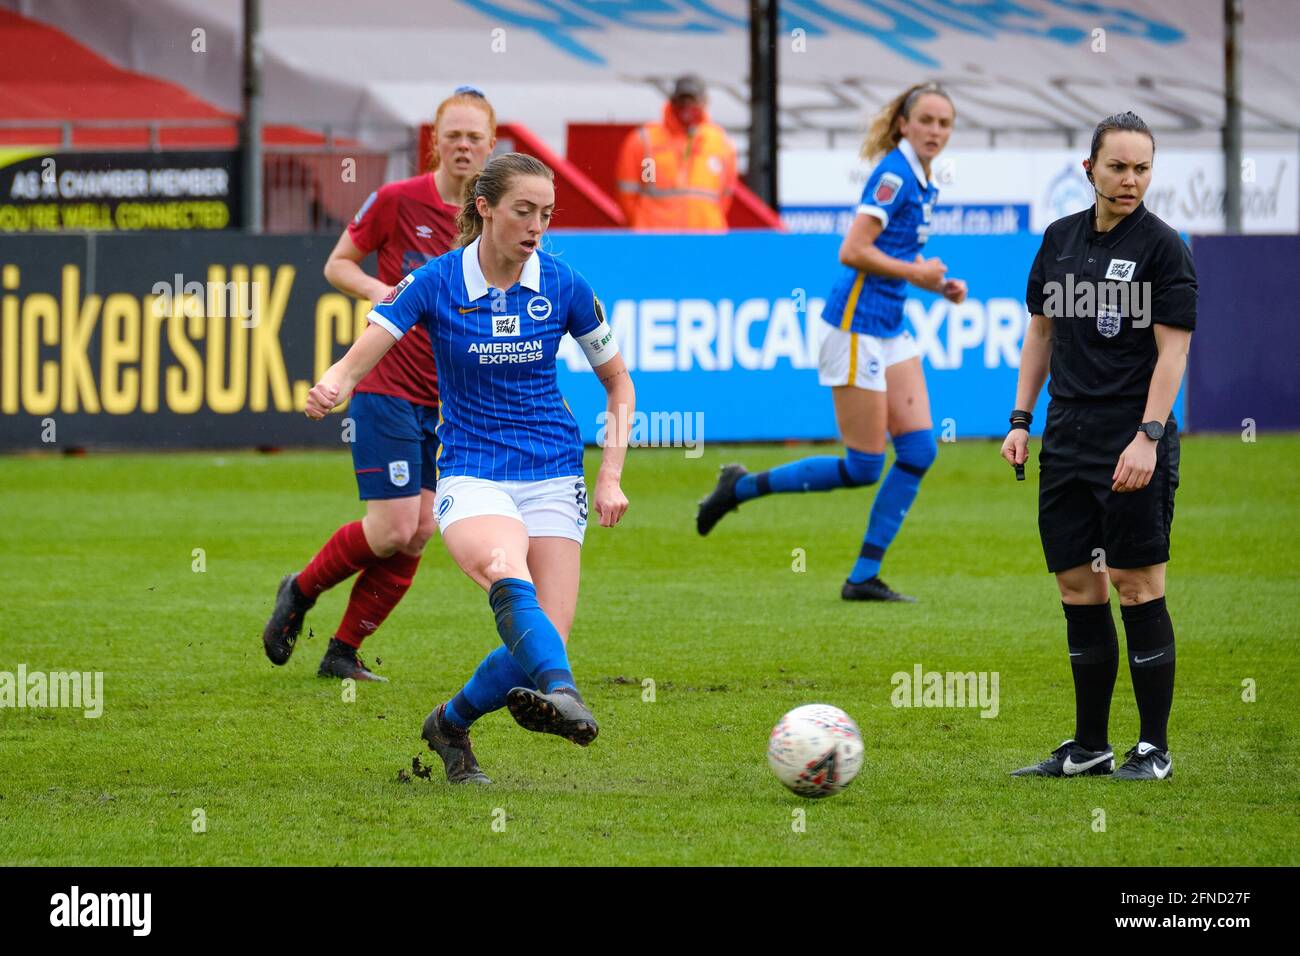 Crawley, UK. 16th May, 2021. Megan Connolly (8 Brighton & Hove Albion) passing the ball during the FA Cup game between Brighton & Hove Albion and Huddersfield Town at The Peoples Pension Stadium in Crawley Credit: SPP Sport Press Photo. /Alamy Live News Stock Photo